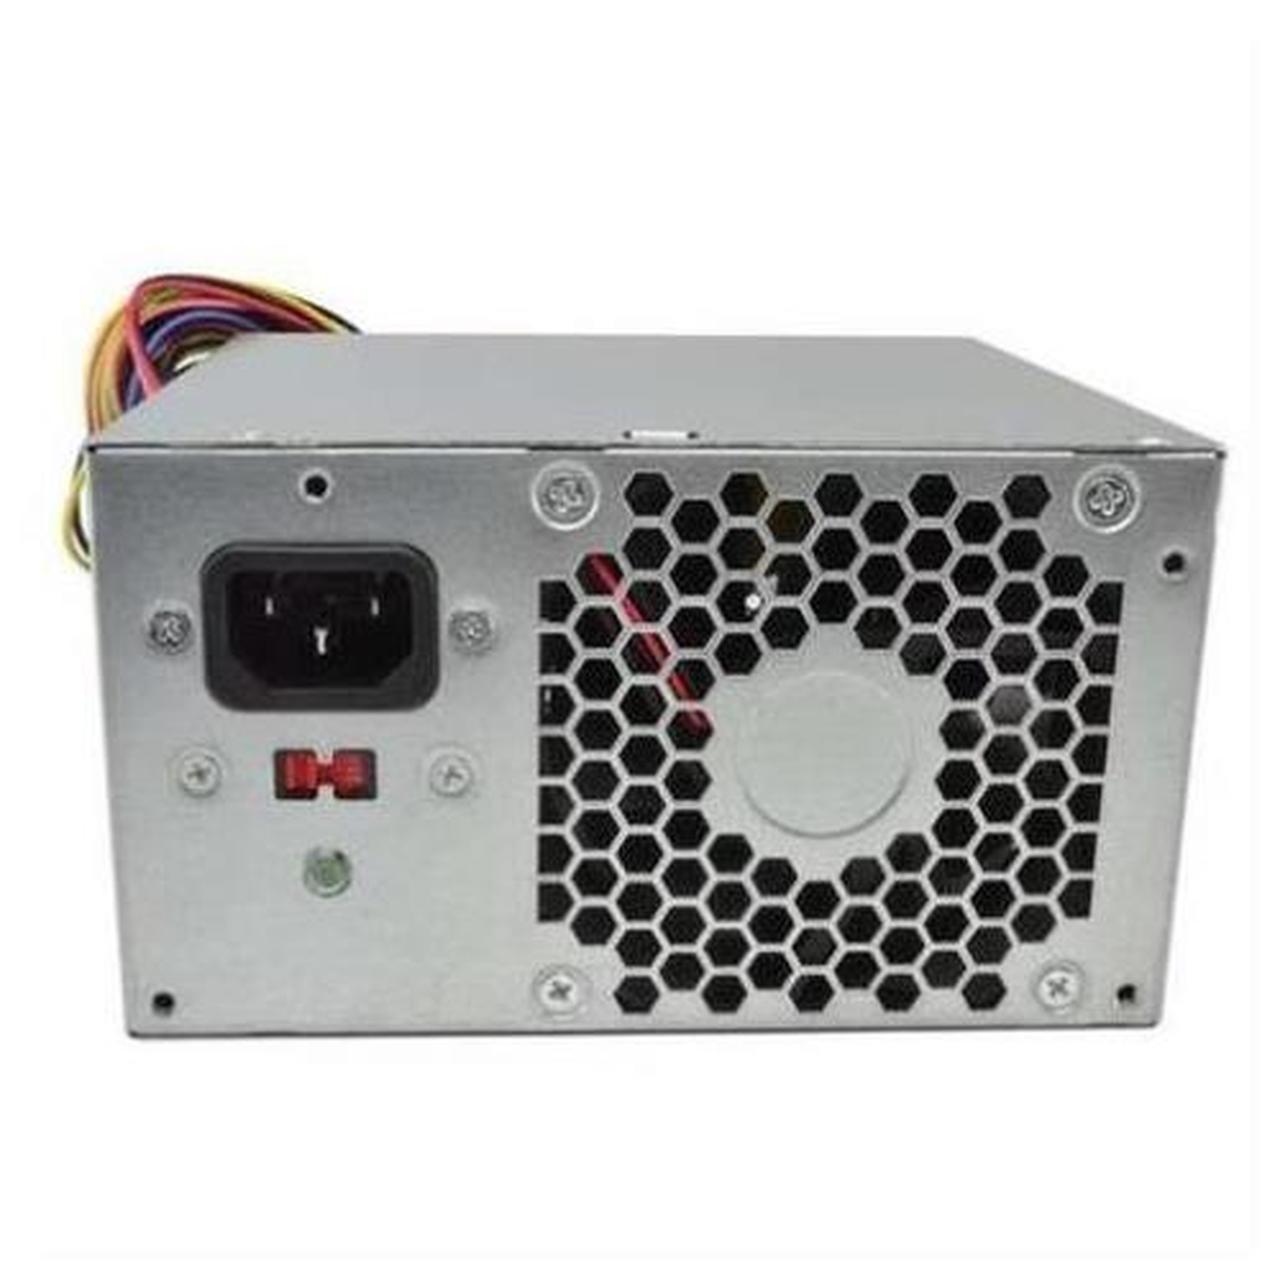 600W DS4700 Express Storage Subsystem DC Power Supply/Fan Unit Image